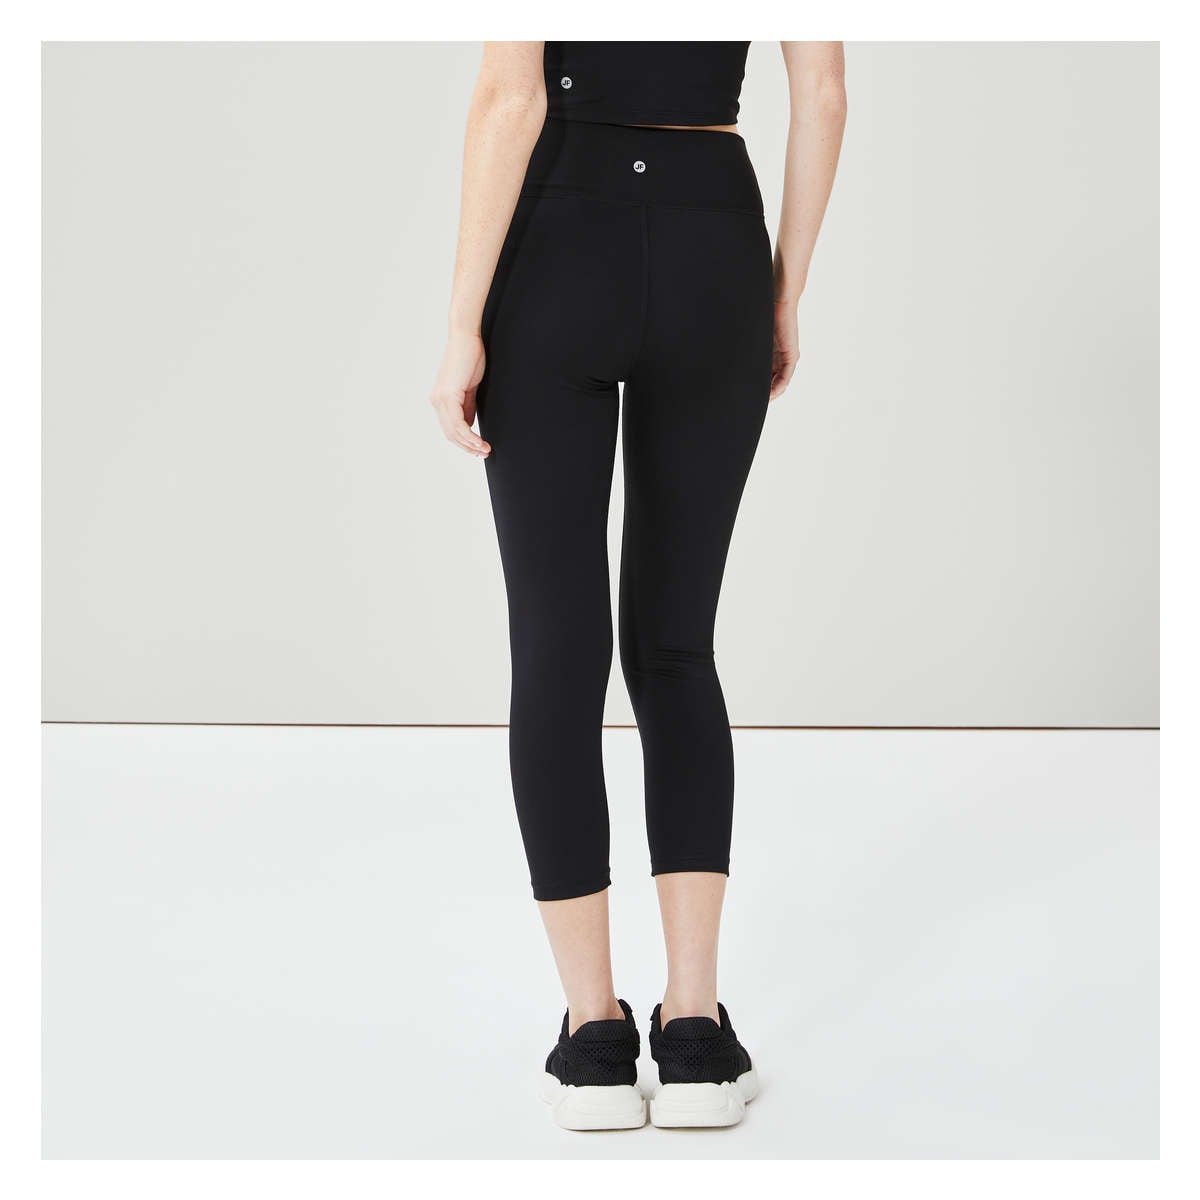 Cotton Stretch Leggings With Pocketsmith